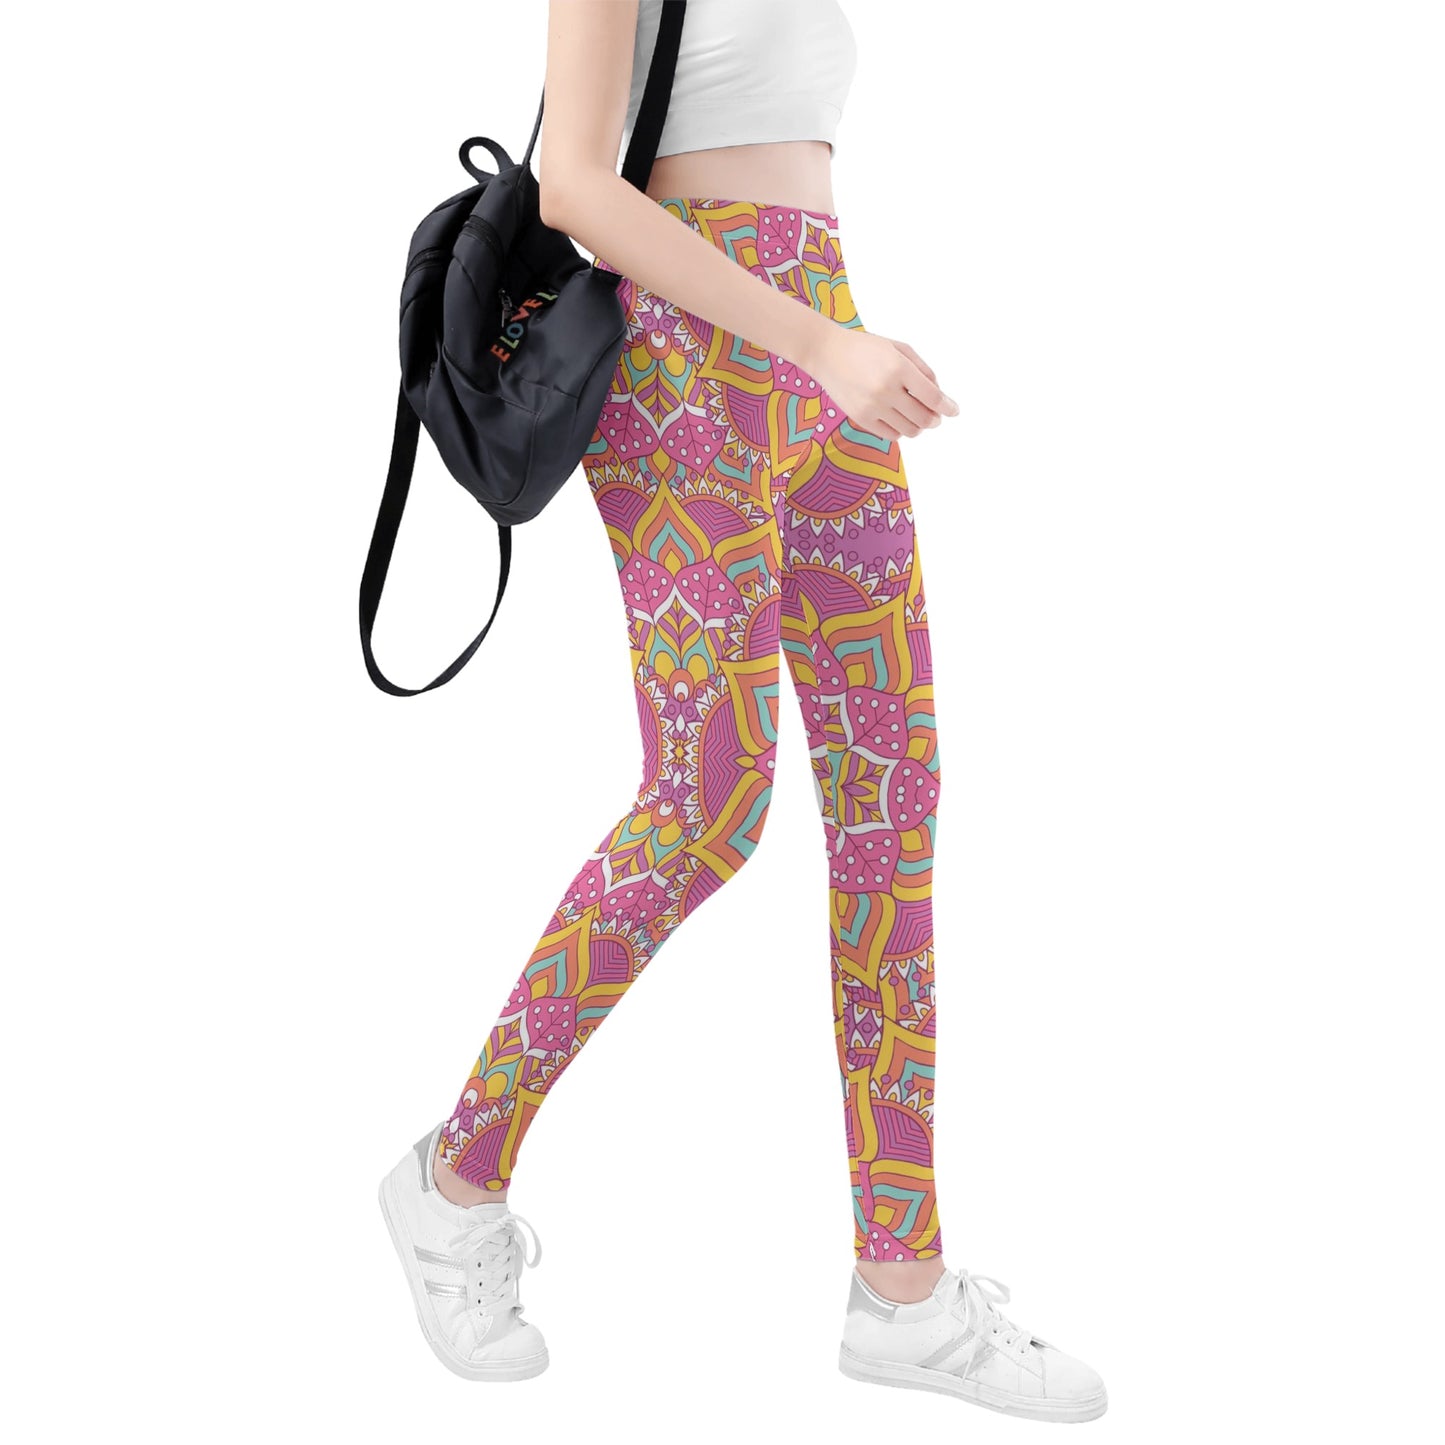 Pastel Multi-Color Womens Leggings that provide a perfect fit